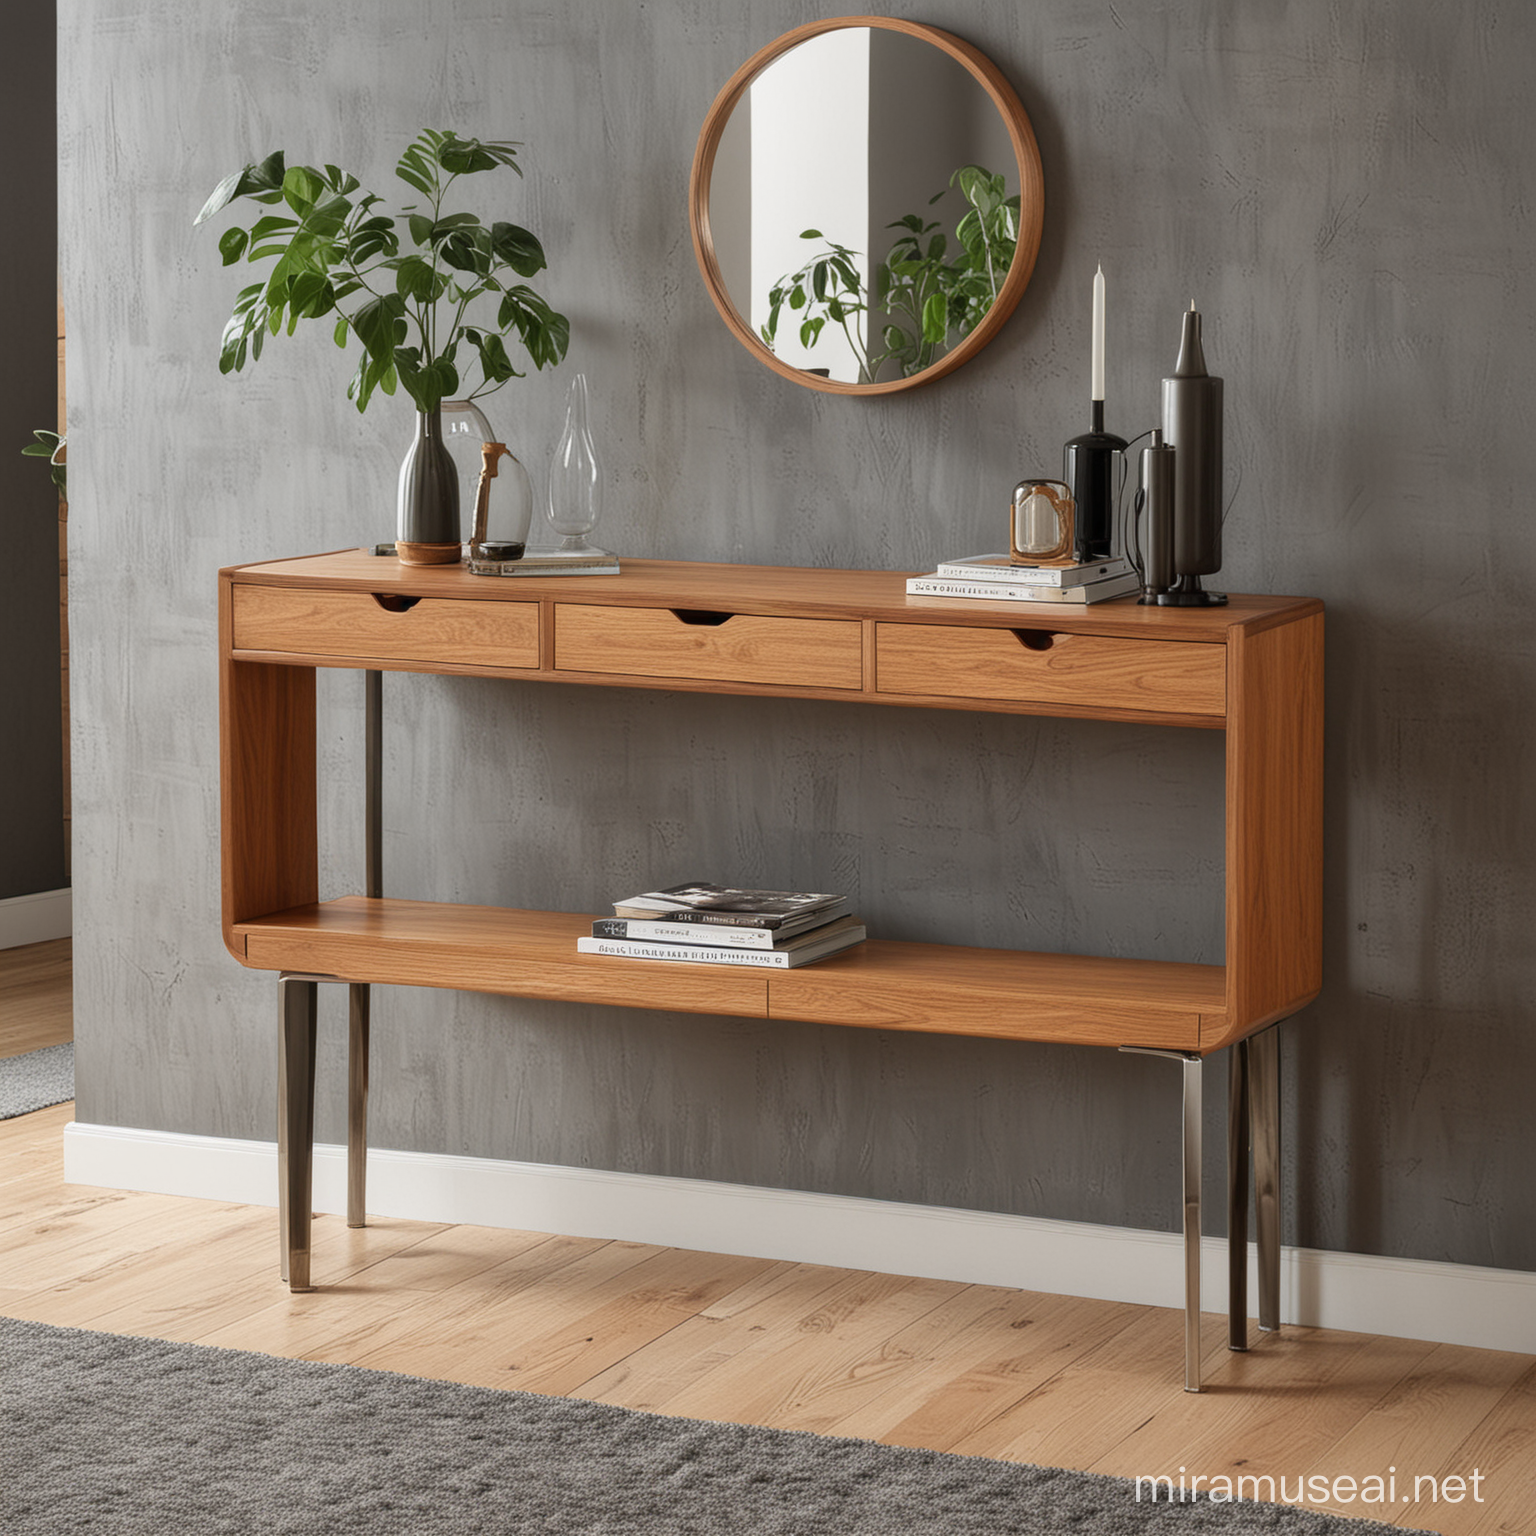 console table design in mid century modern style  with Corbusier touch